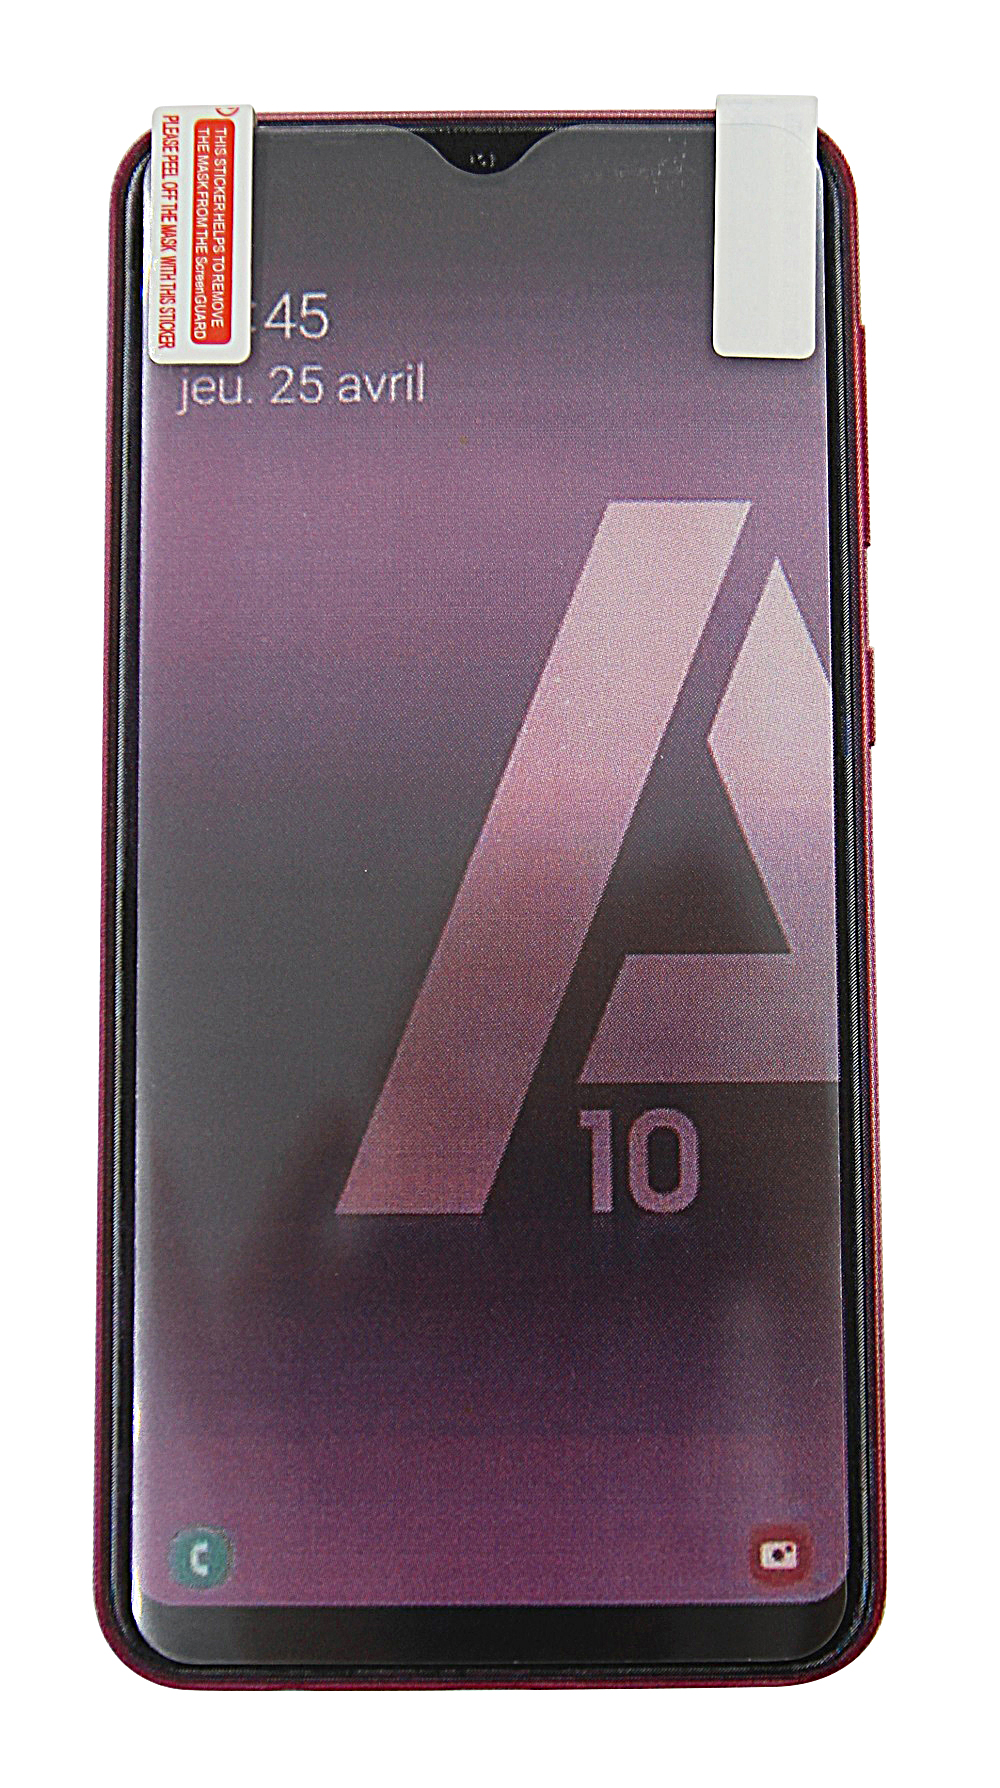 6-Pack Skrmbeskyttelse Samsung Galaxy A10 (A105F/DS)